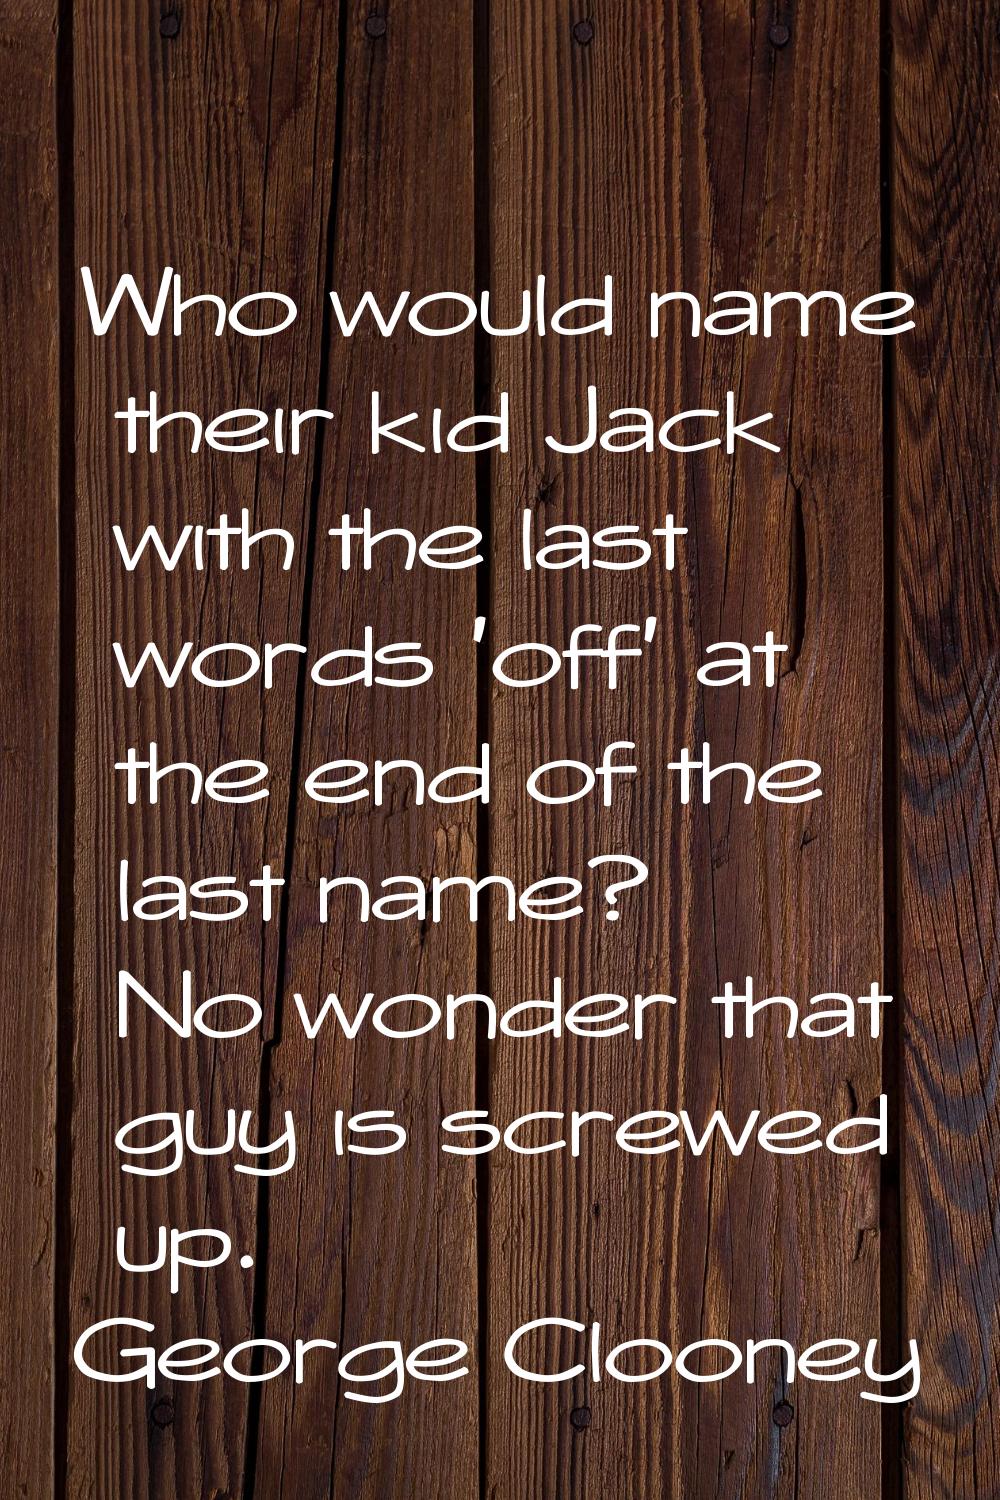 Who would name their kid Jack with the last words 'off' at the end of the last name? No wonder that